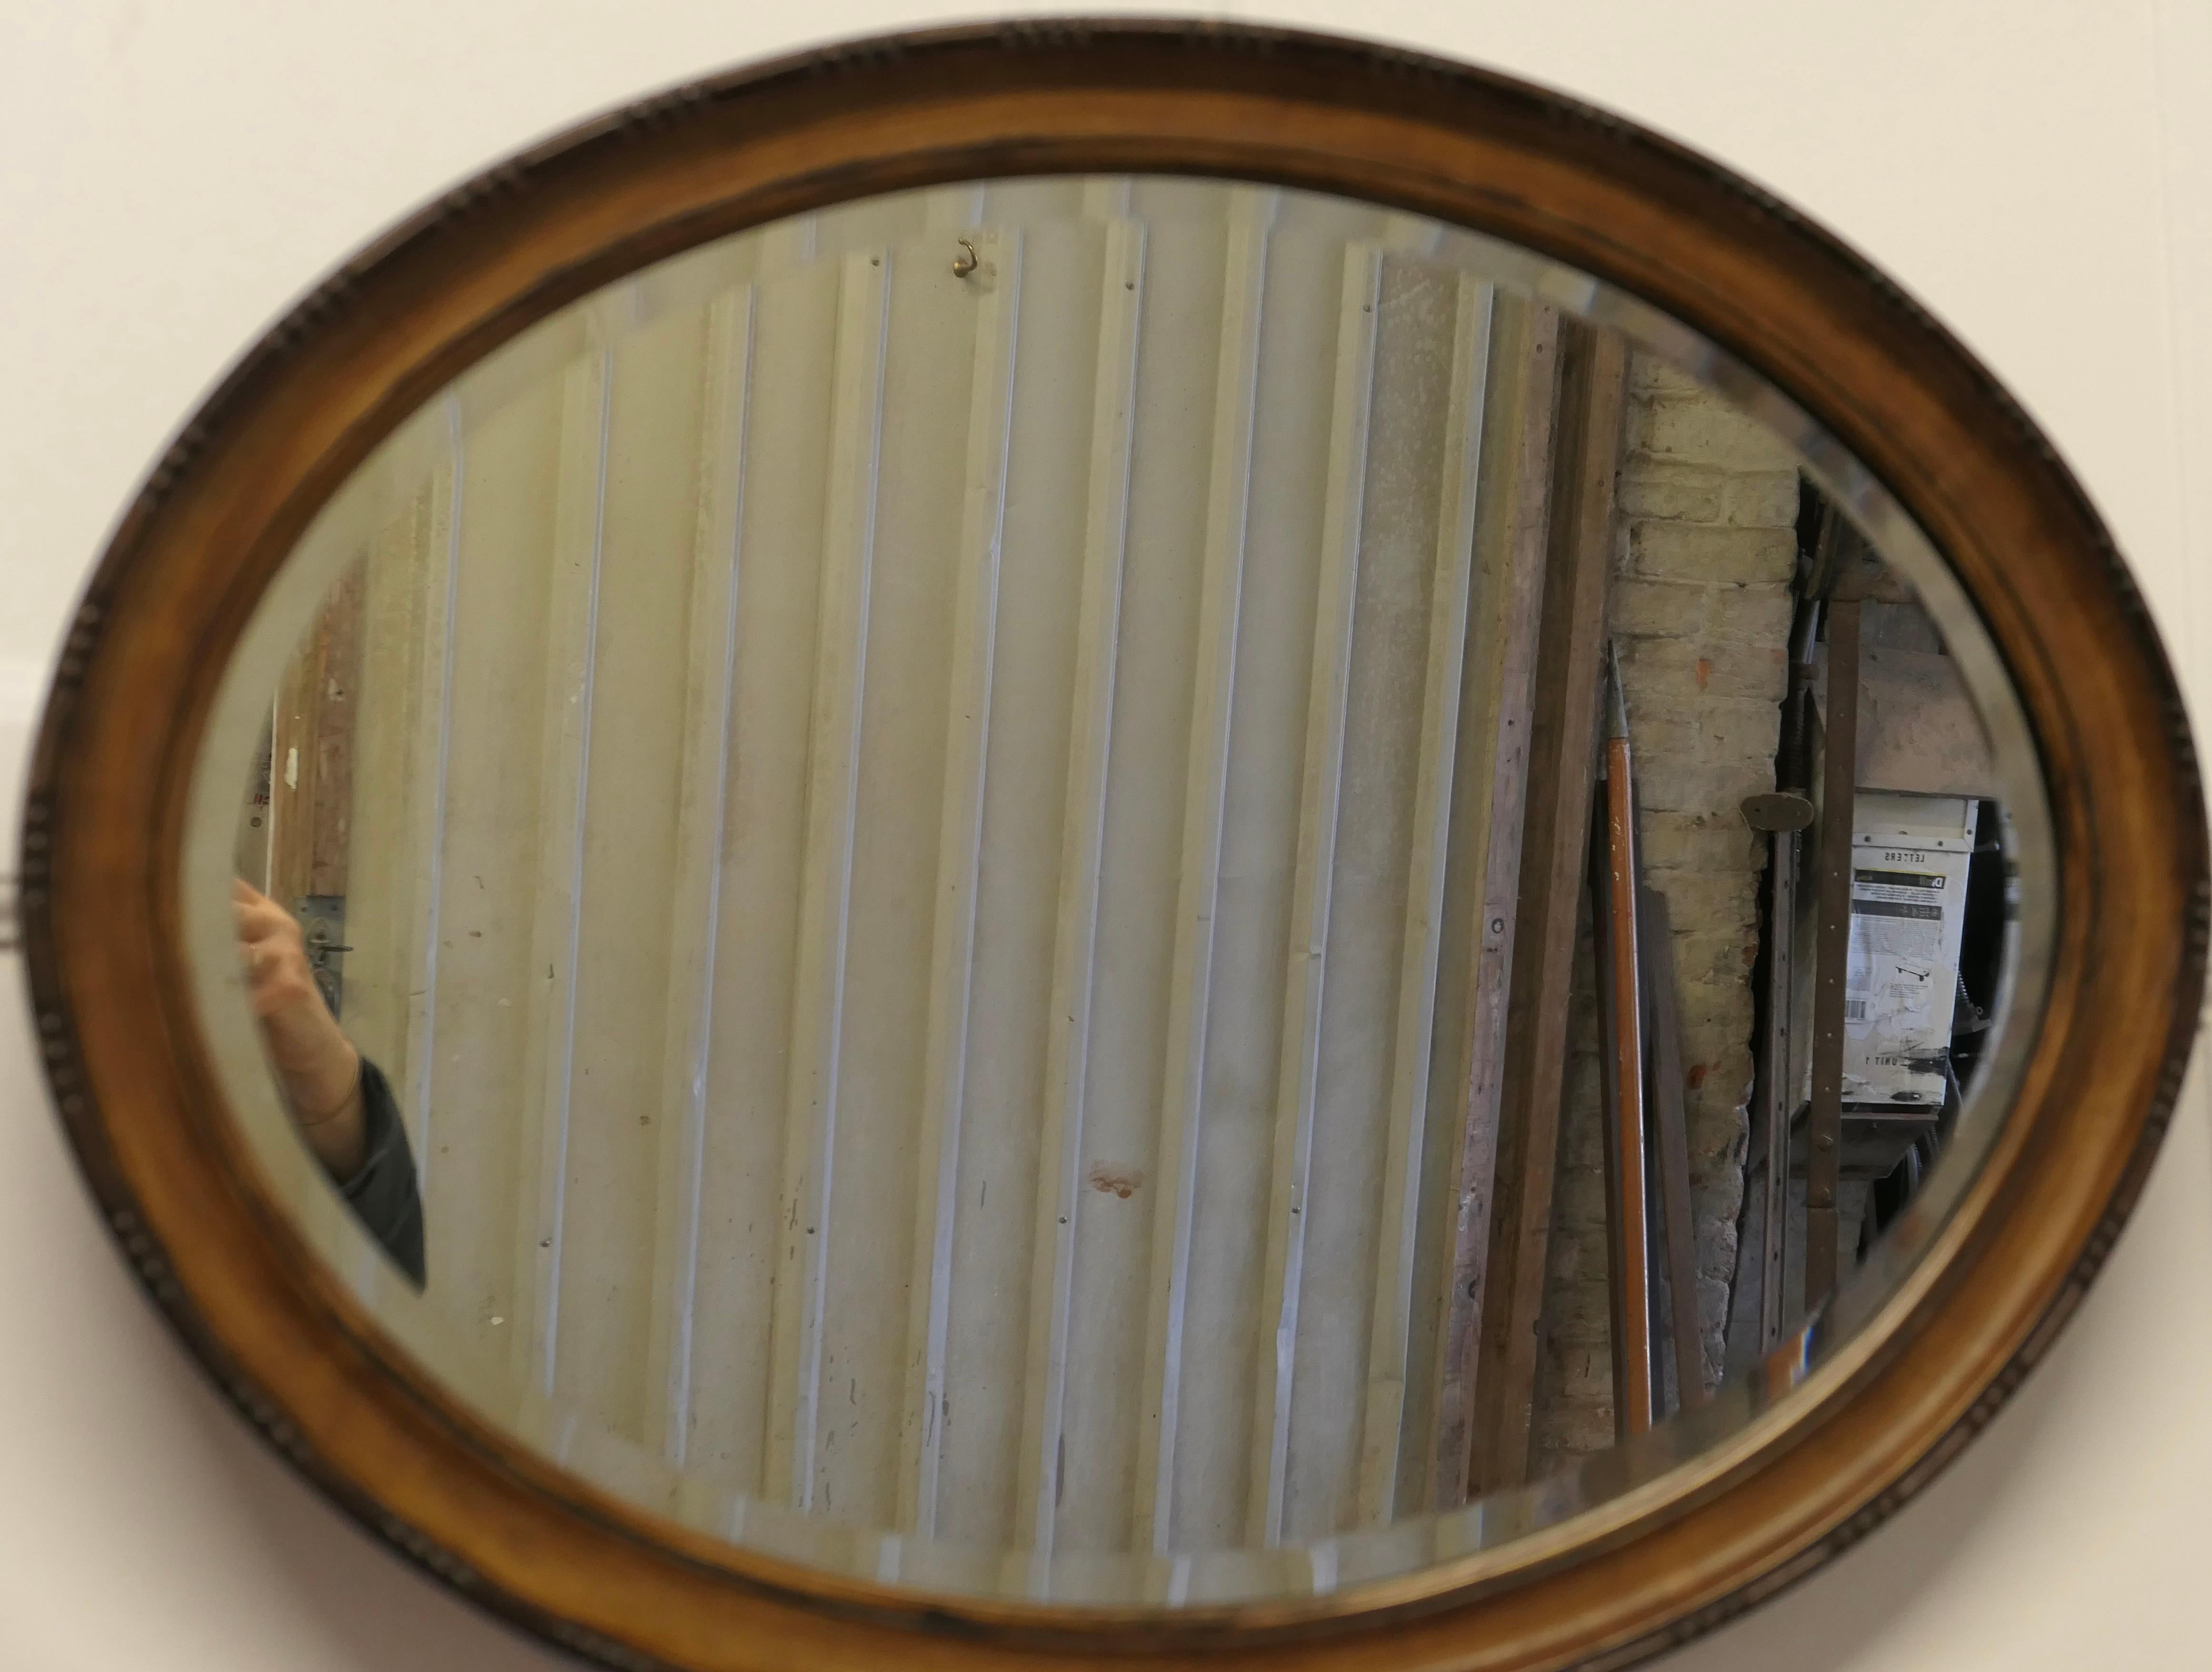 Scumble Finish Oval Mirror

This Mirror has a 2” wide moulded oval frame, this has a Scumble simulated light Walnut finish and a moulded edge 
The Oval frame is in good attractive condition as is the original Oval bevelled looking glass
The